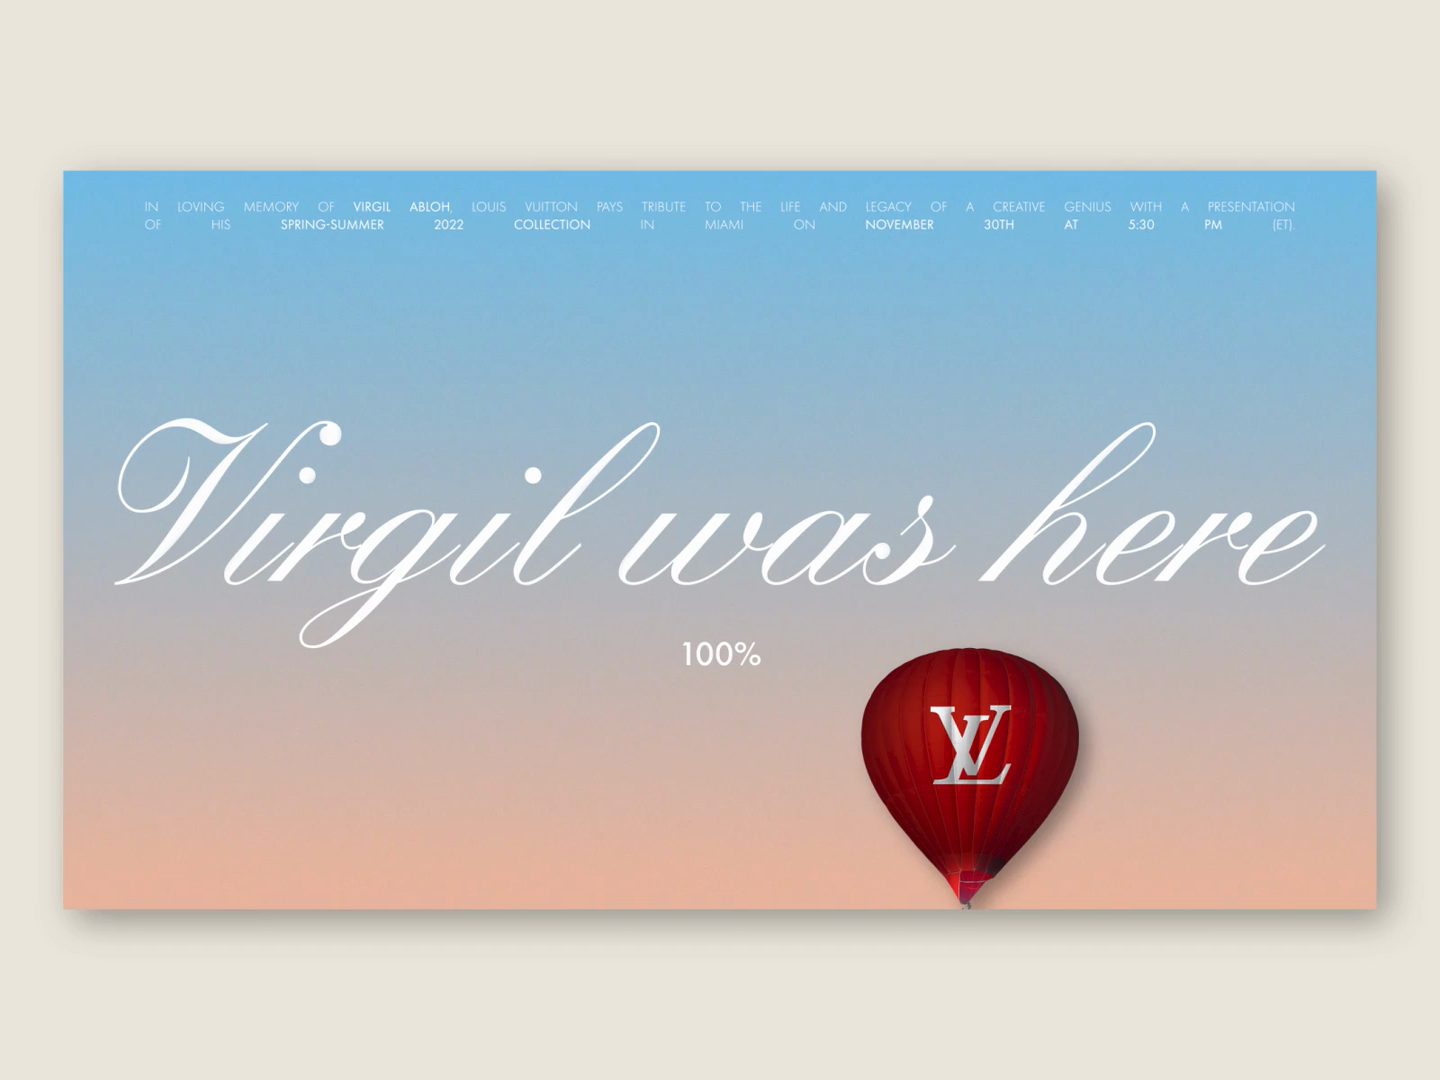 Virgil was here by Marco Quarta on Dribbble